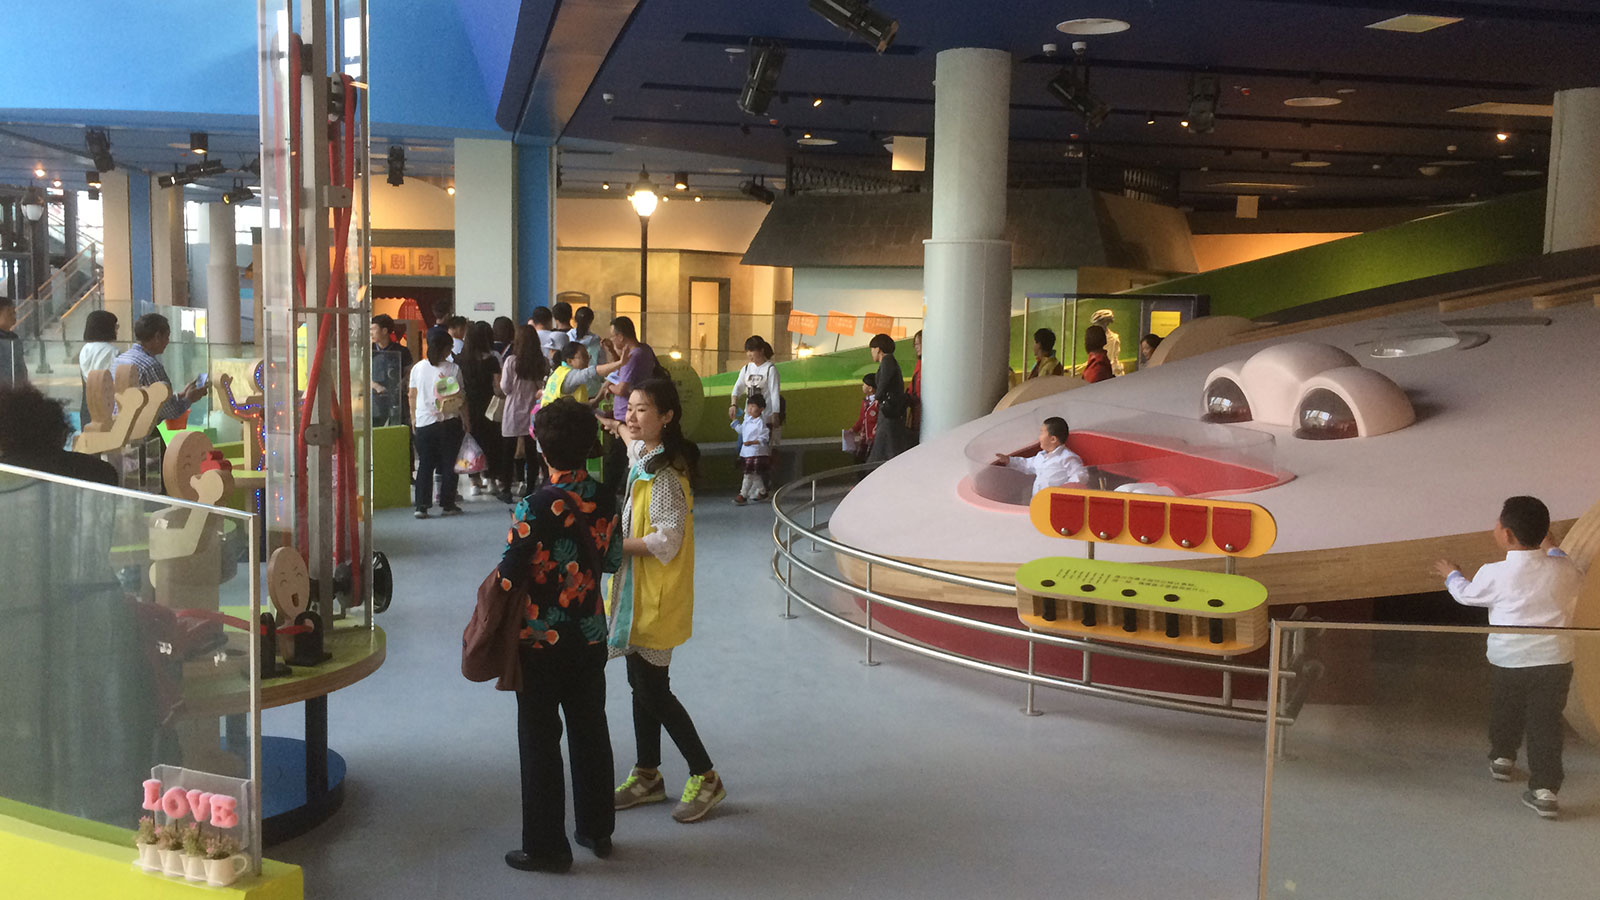 Hohhot Children’s Discovery Museum, HOHHOT CITY